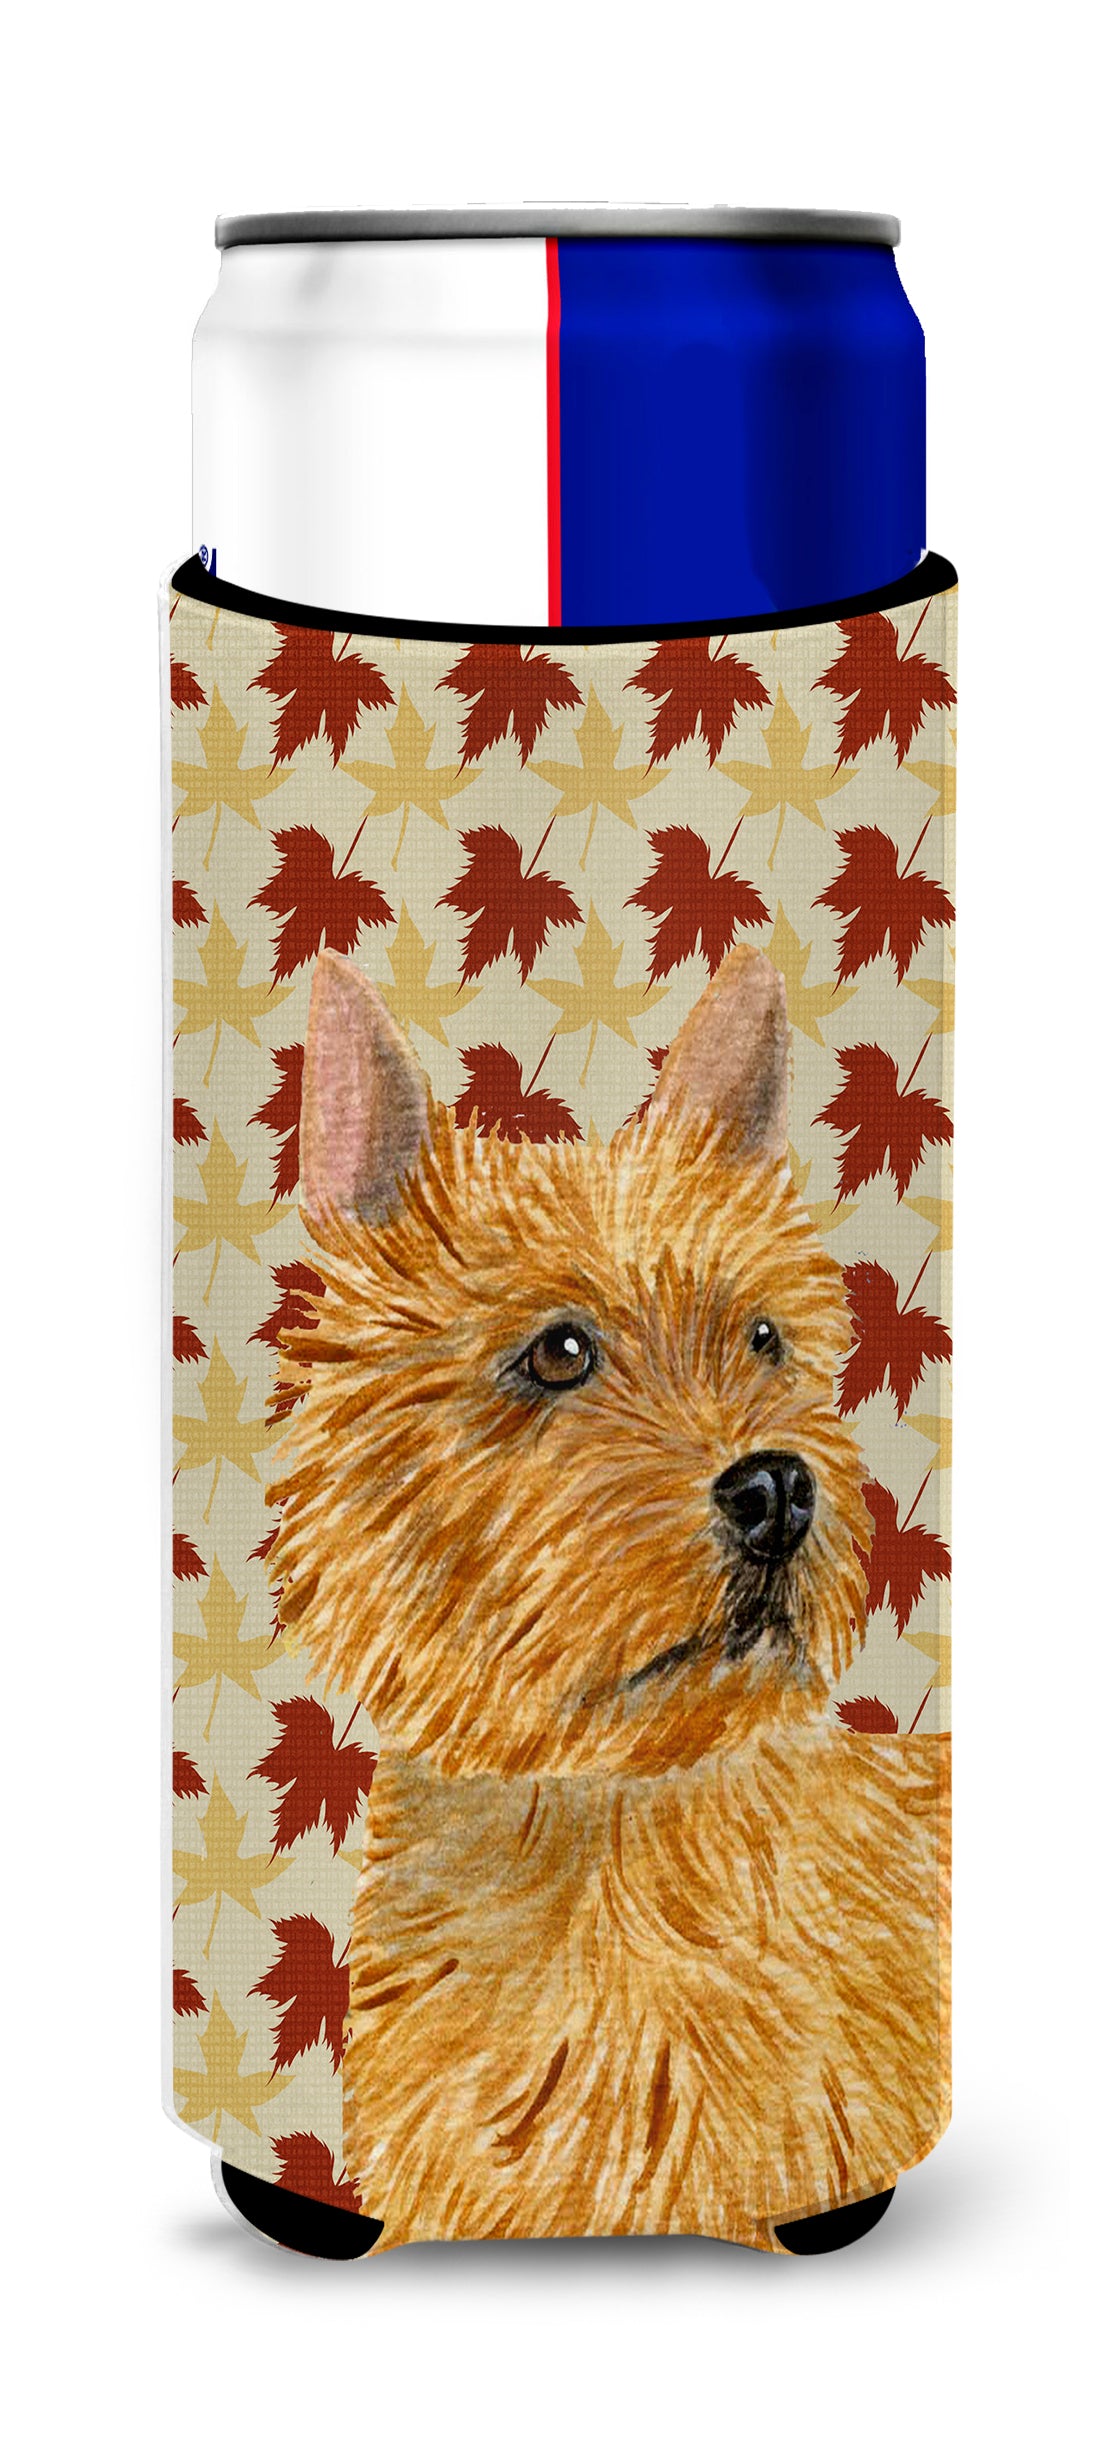 Norwich Terrier Fall Leaves Portrait Ultra Beverage Insulators for slim cans SS4357MUK